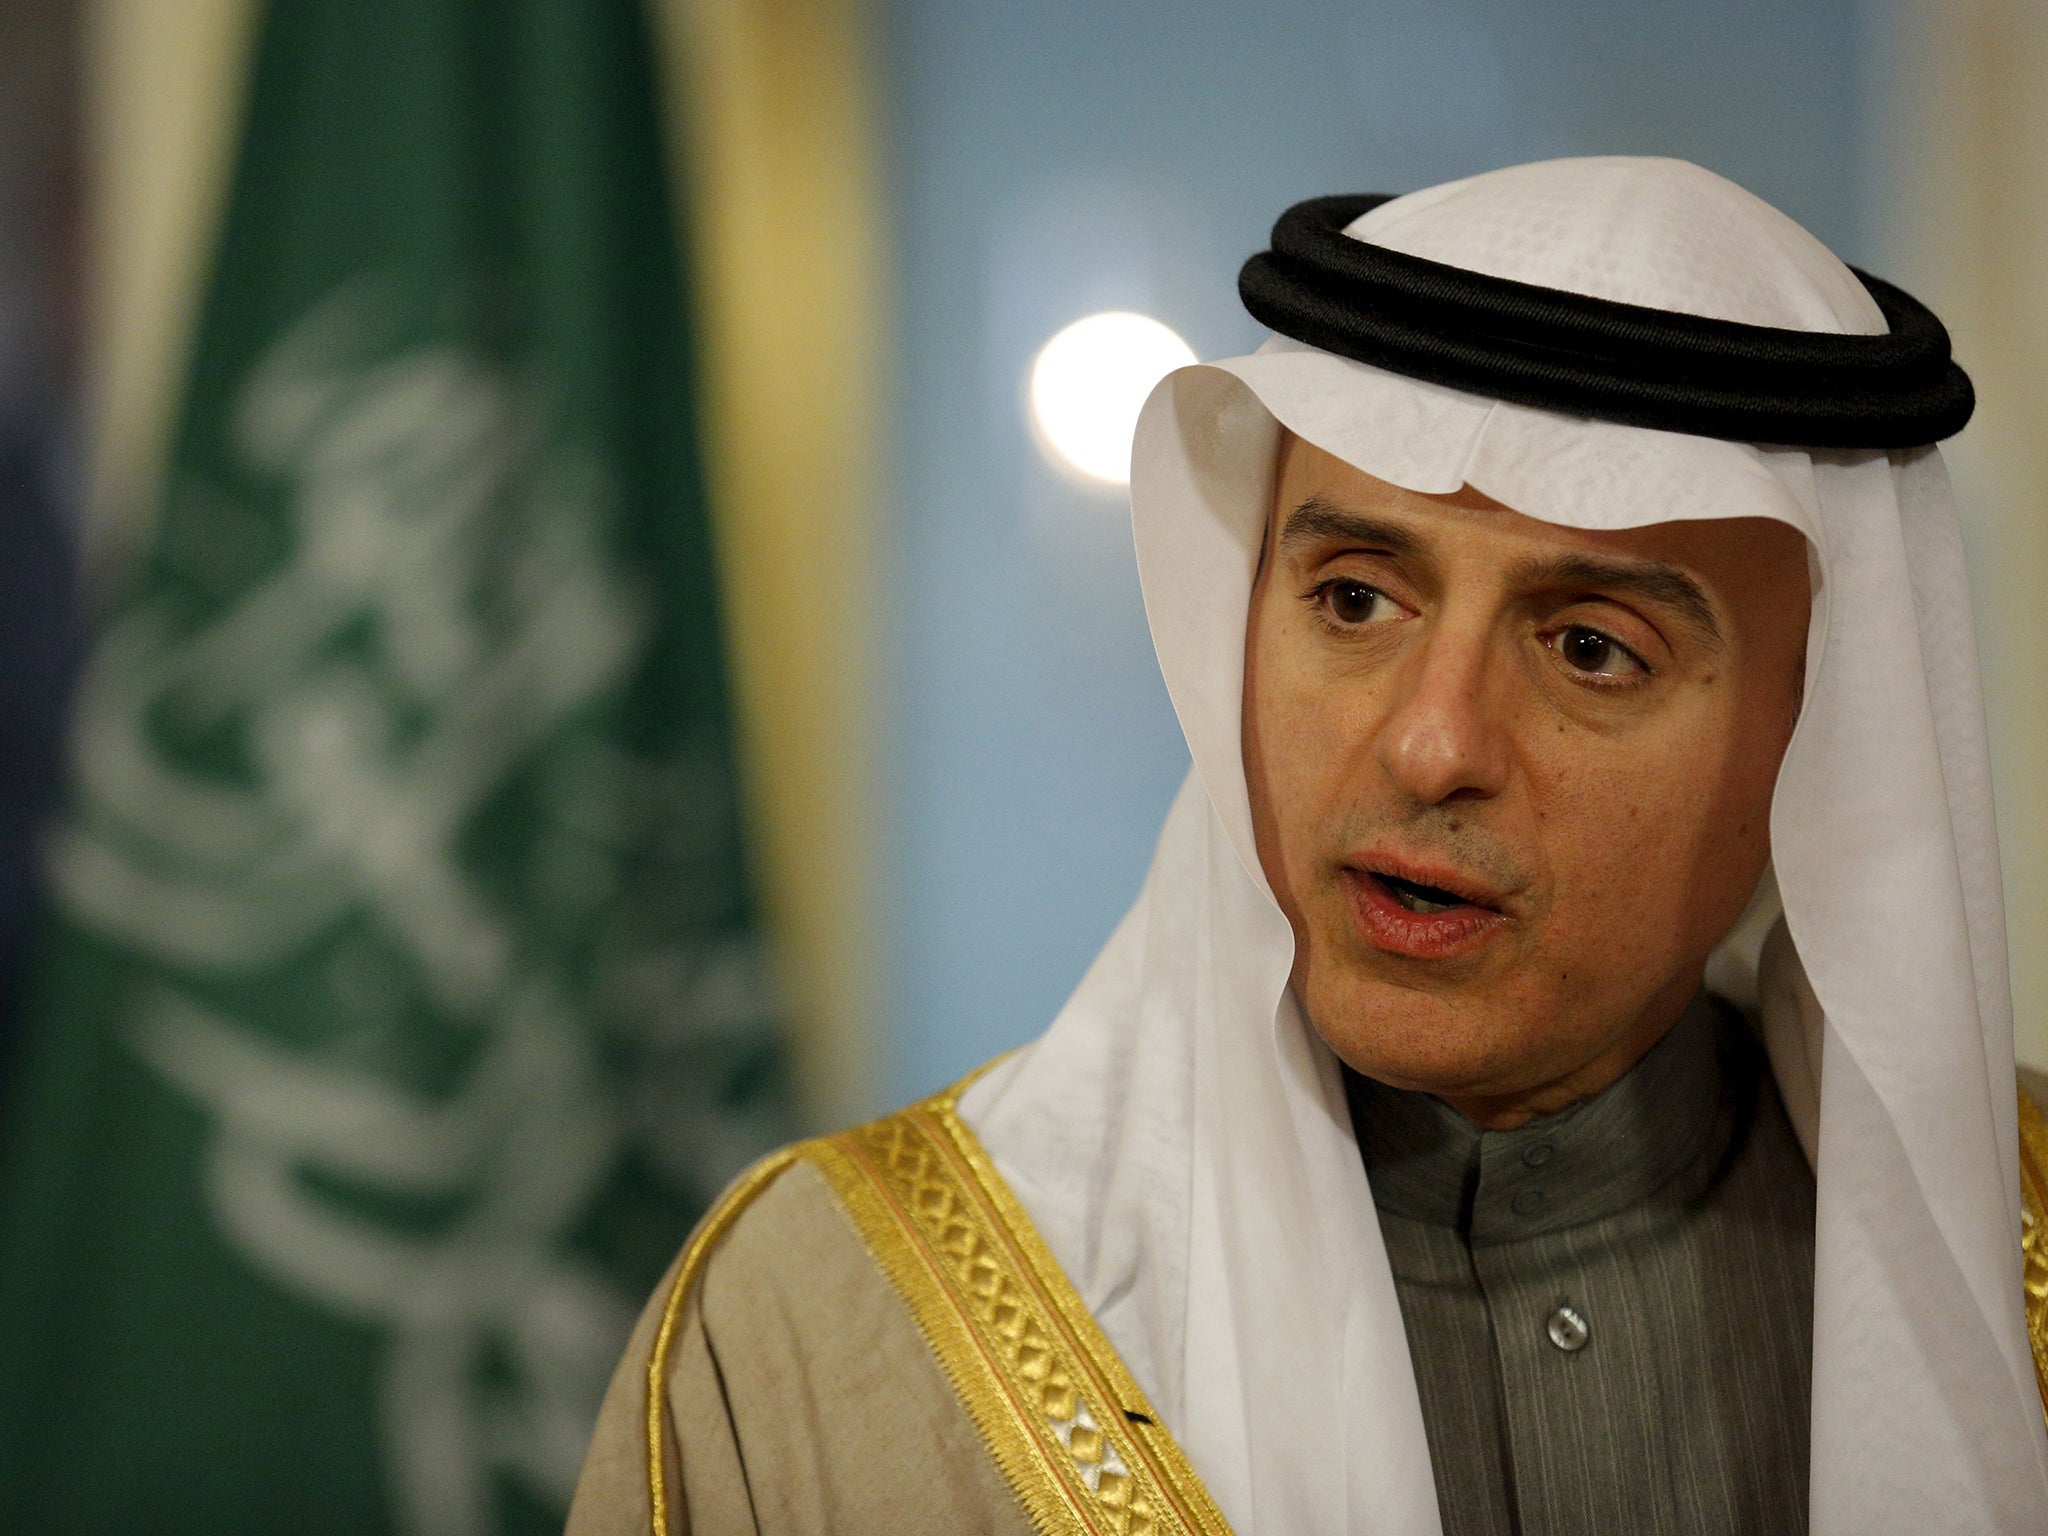 Saudi Foreign Minister Adel al-Jubeir delivers a statement after a meeting with U.S. Secretary of State John Kerry at the State Department in Washington,